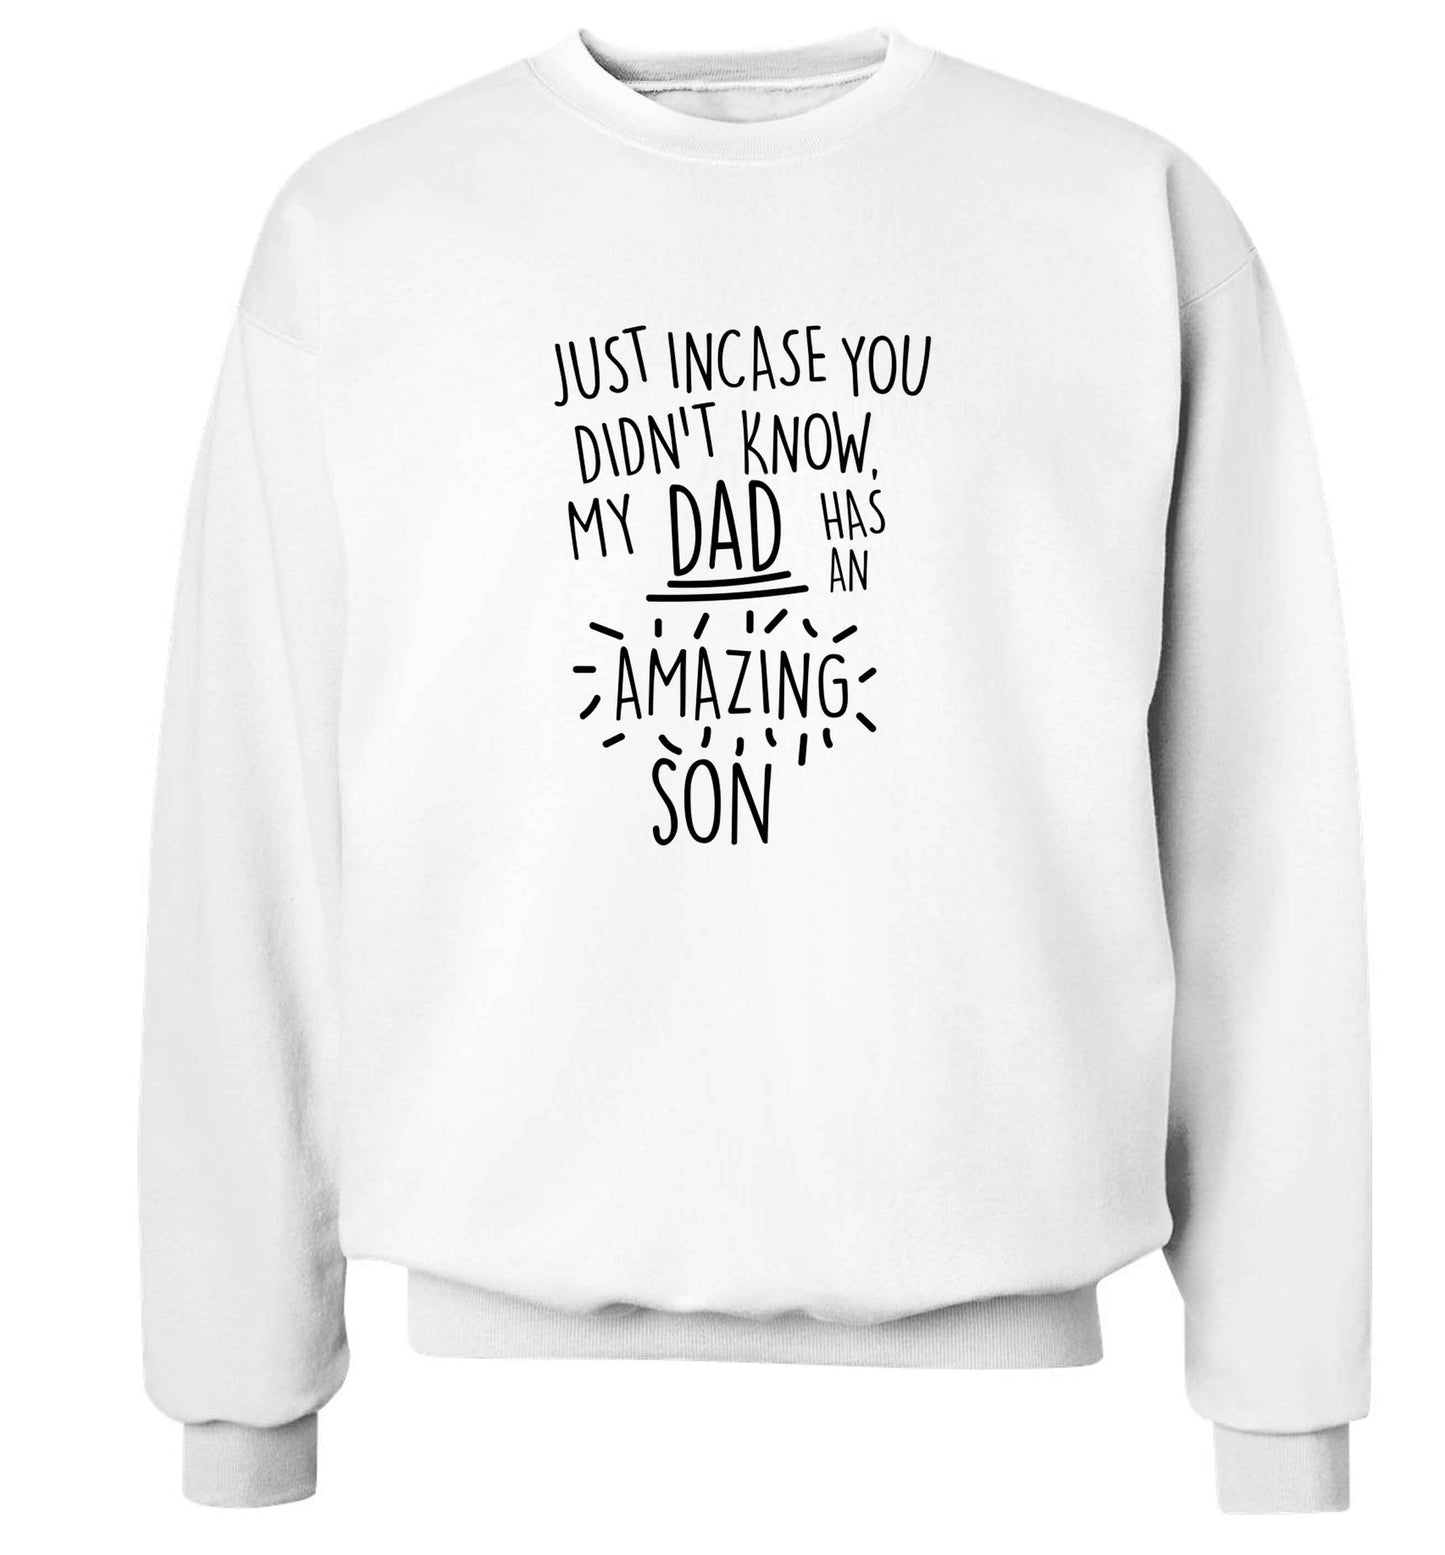 Just incase you didn't know my dad has an amazing son adult's unisex white sweater 2XL